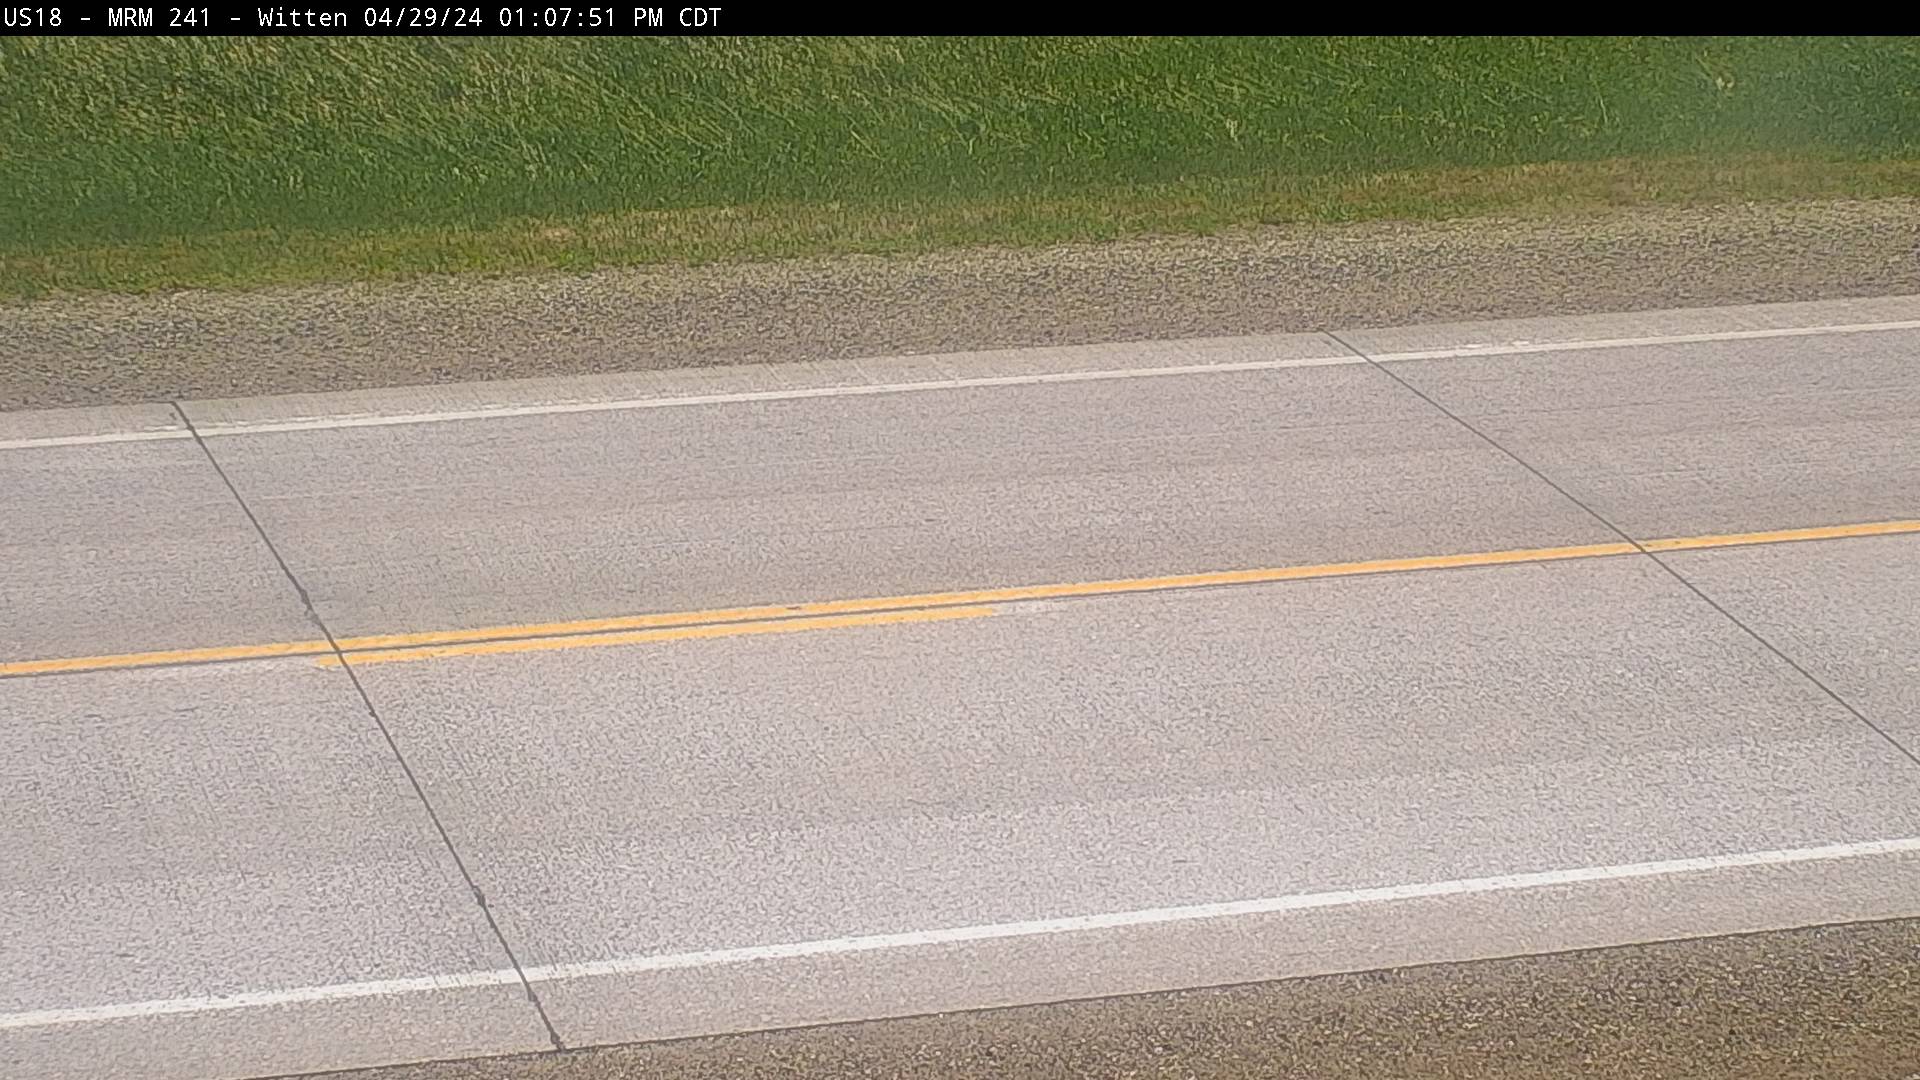 4 miles south of town along US-18 @ MP 241 - Southeast Traffic Camera